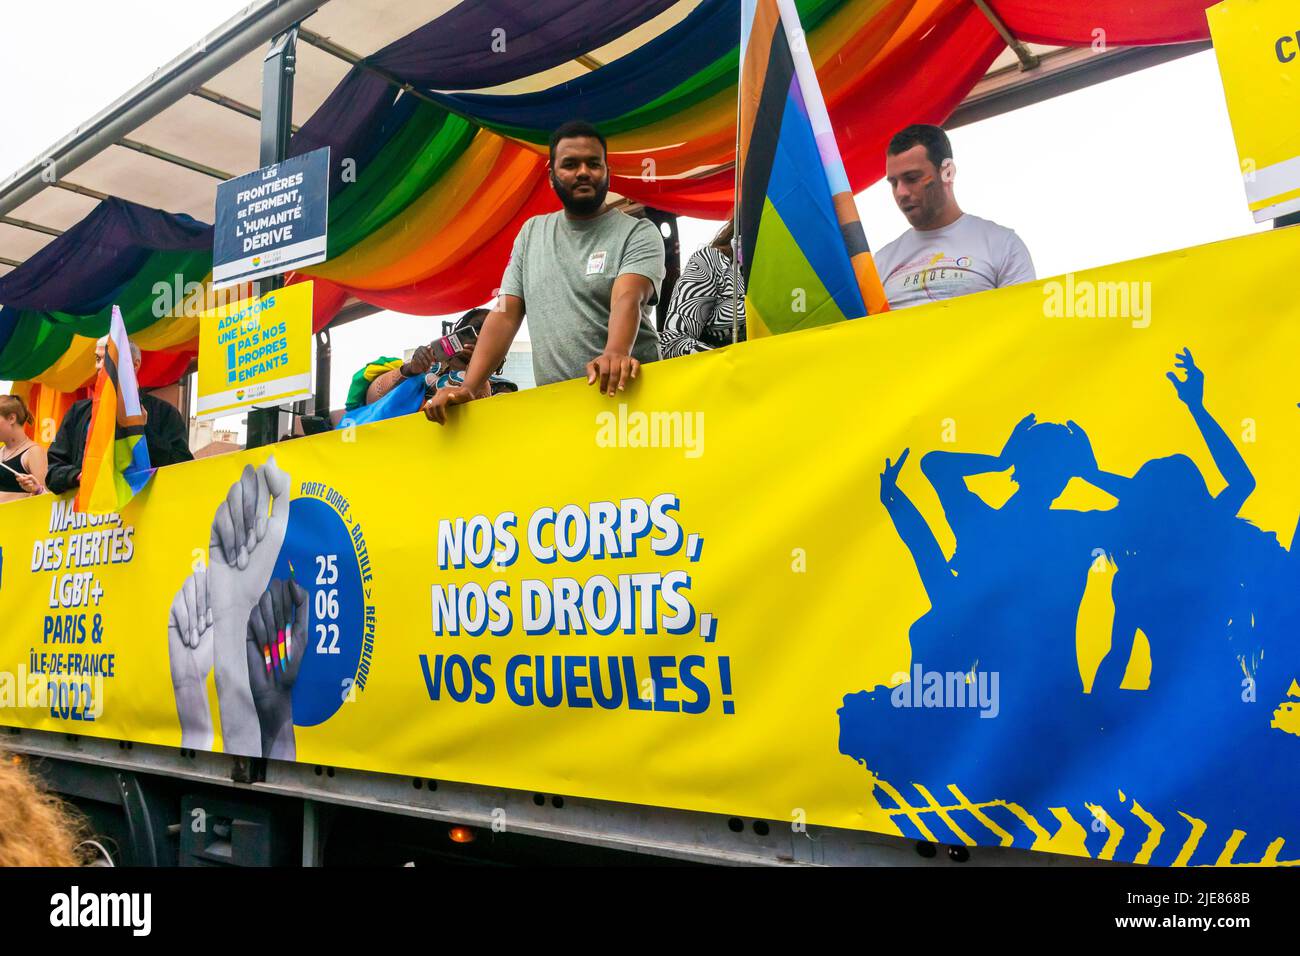 Paris, France, Man on Truck with Protest Banner in Gay Pride/ LGBTQI March, with Colors of Ukrainian Flag, International Solidarity, gay rights march, lgbt rights protest Stock Photo